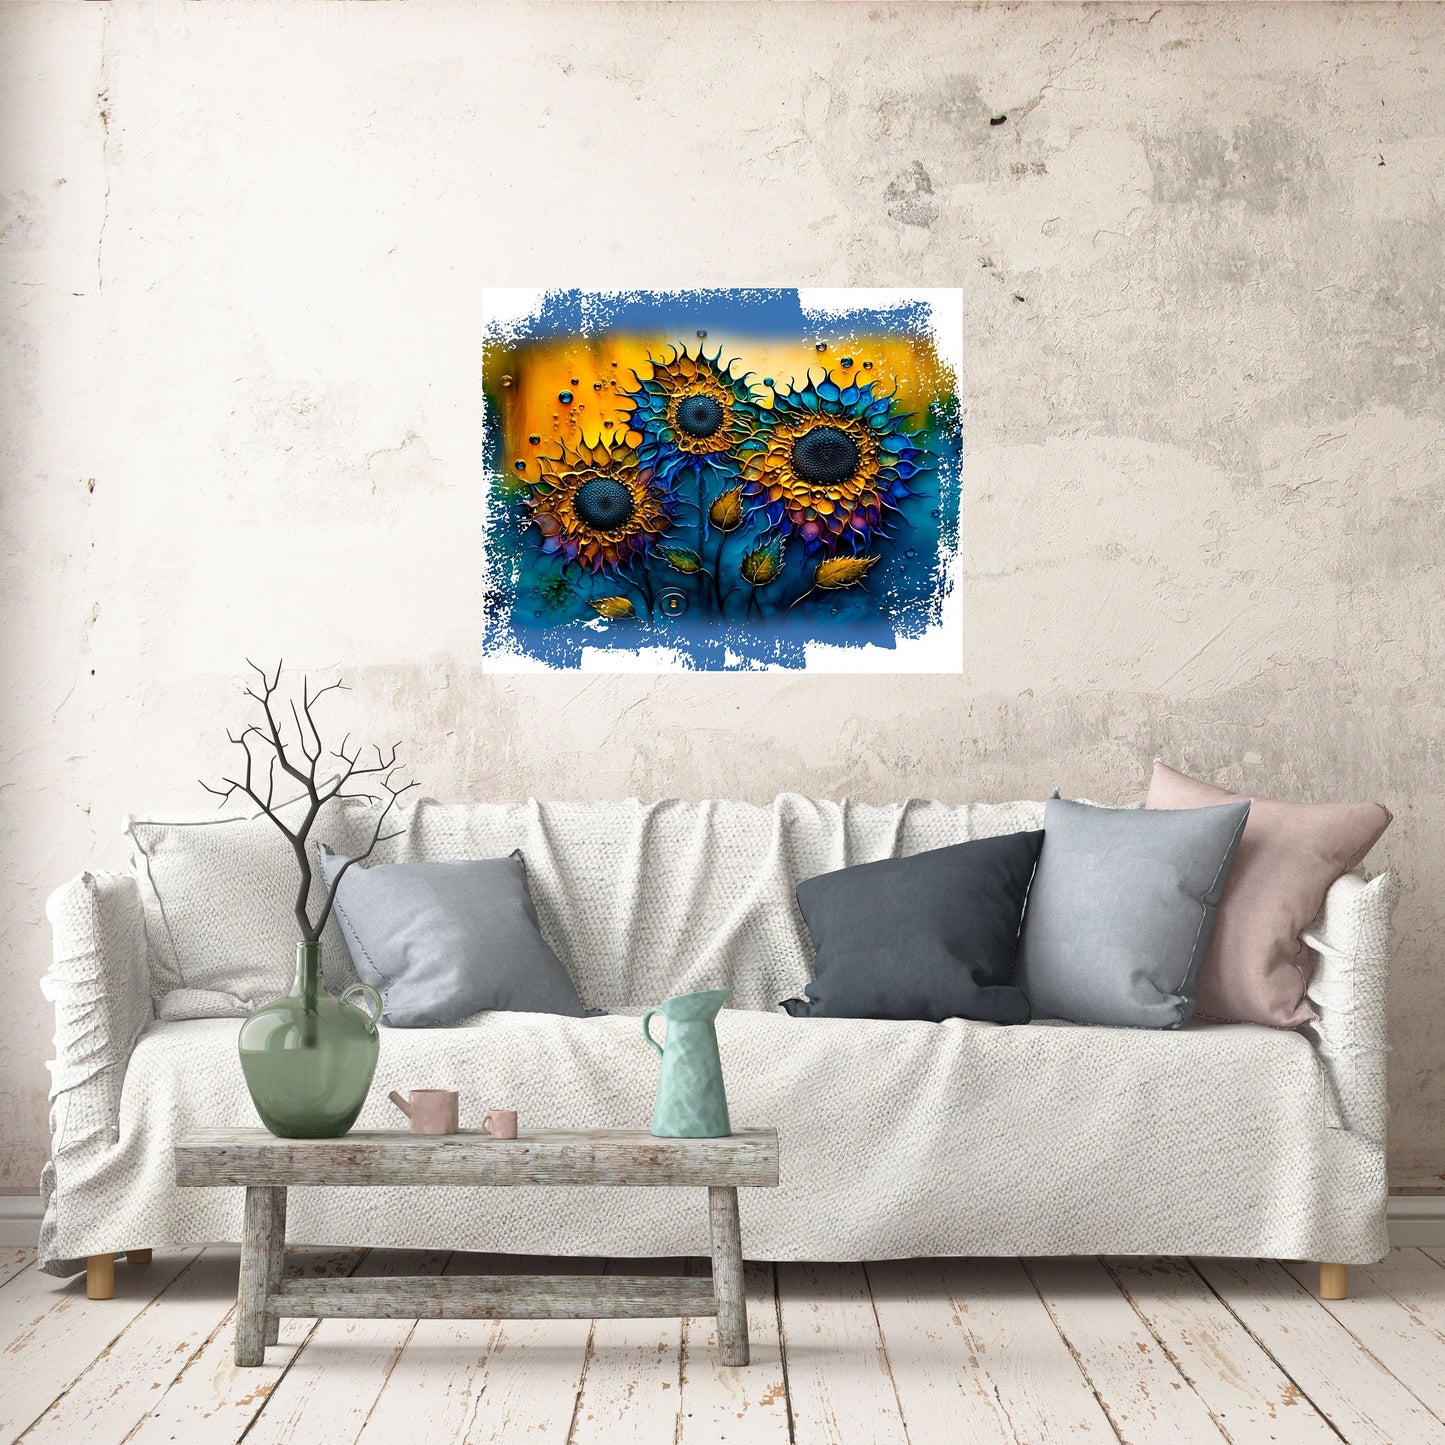 16x20 Sunflowers in Blue Floral Wall Art Canvas Print